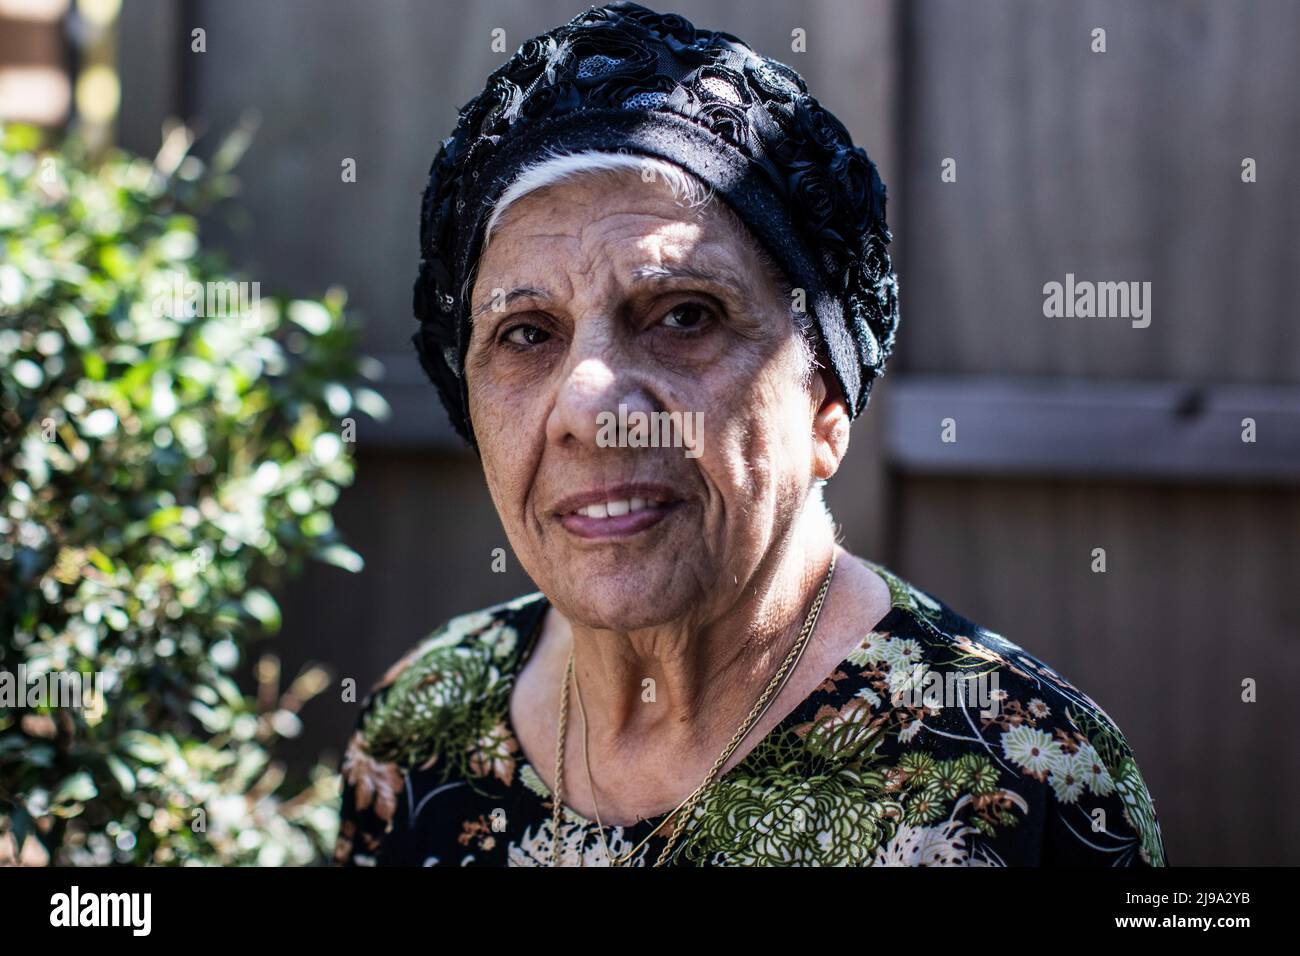 18 May 2022, Israel, Kiryat Bialik: Chaja Masus stands in the garden of her house. Her parents had come to Haifa from the Tunisian island of Djerba with their eight children in 1948. The affair of disappeared children of Jews from Yemen and other oriental countries is one of the most painful in Israeli history. In the search for the truth, the grave of her brother Usiel, born in 1952 and died in 1953, is now to be opened on Monday. The boy had contracted polio at the age of 10 months. For the follow-up treatment, the parents, who at that time already had three other children besides Usiel, had Stock Photo